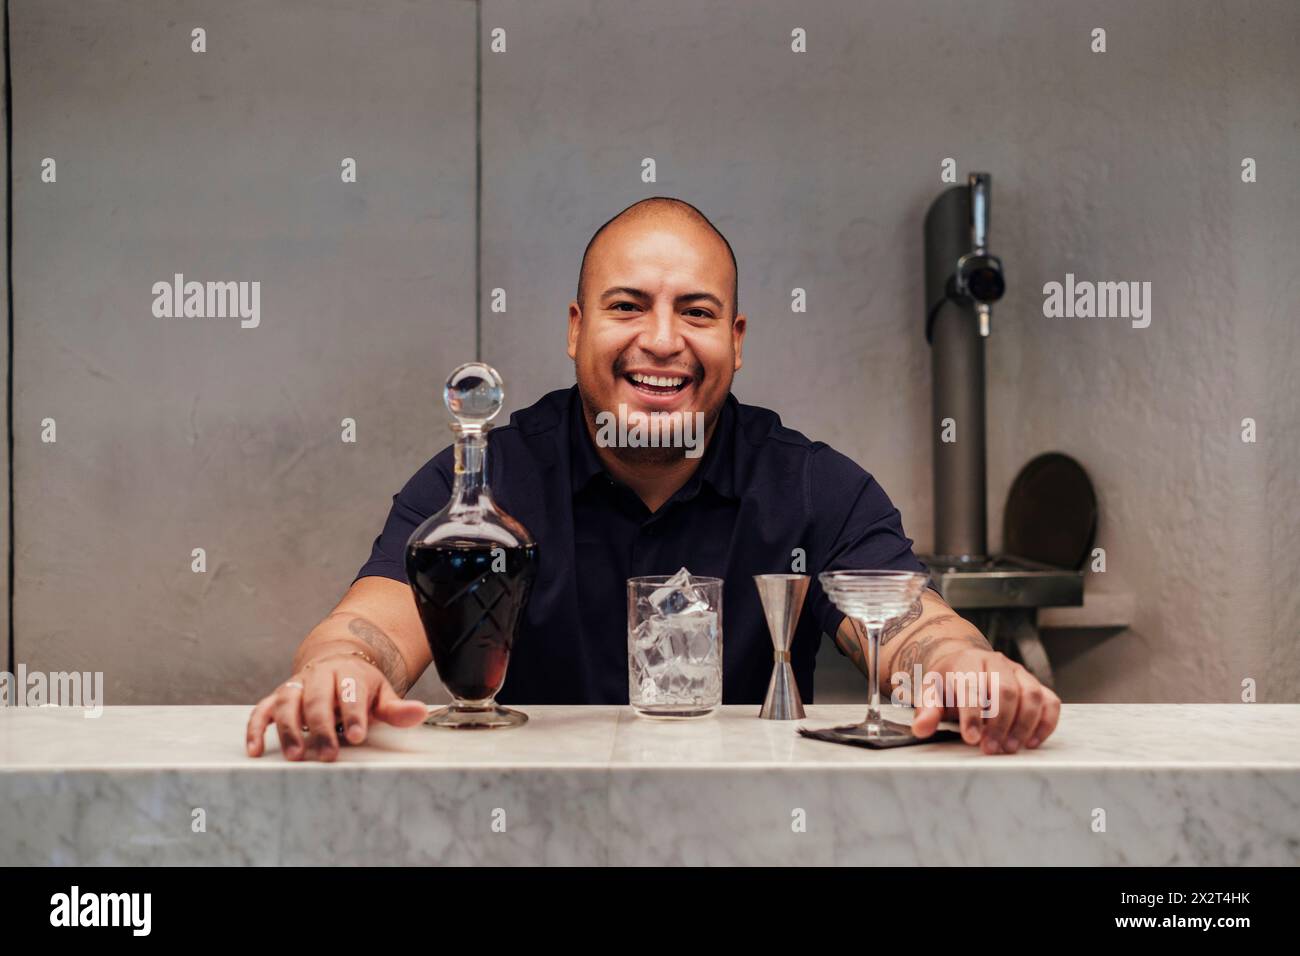 Smiling bartender with cocktail and alcohol bottle at bar counter in restaurant Stock Photo